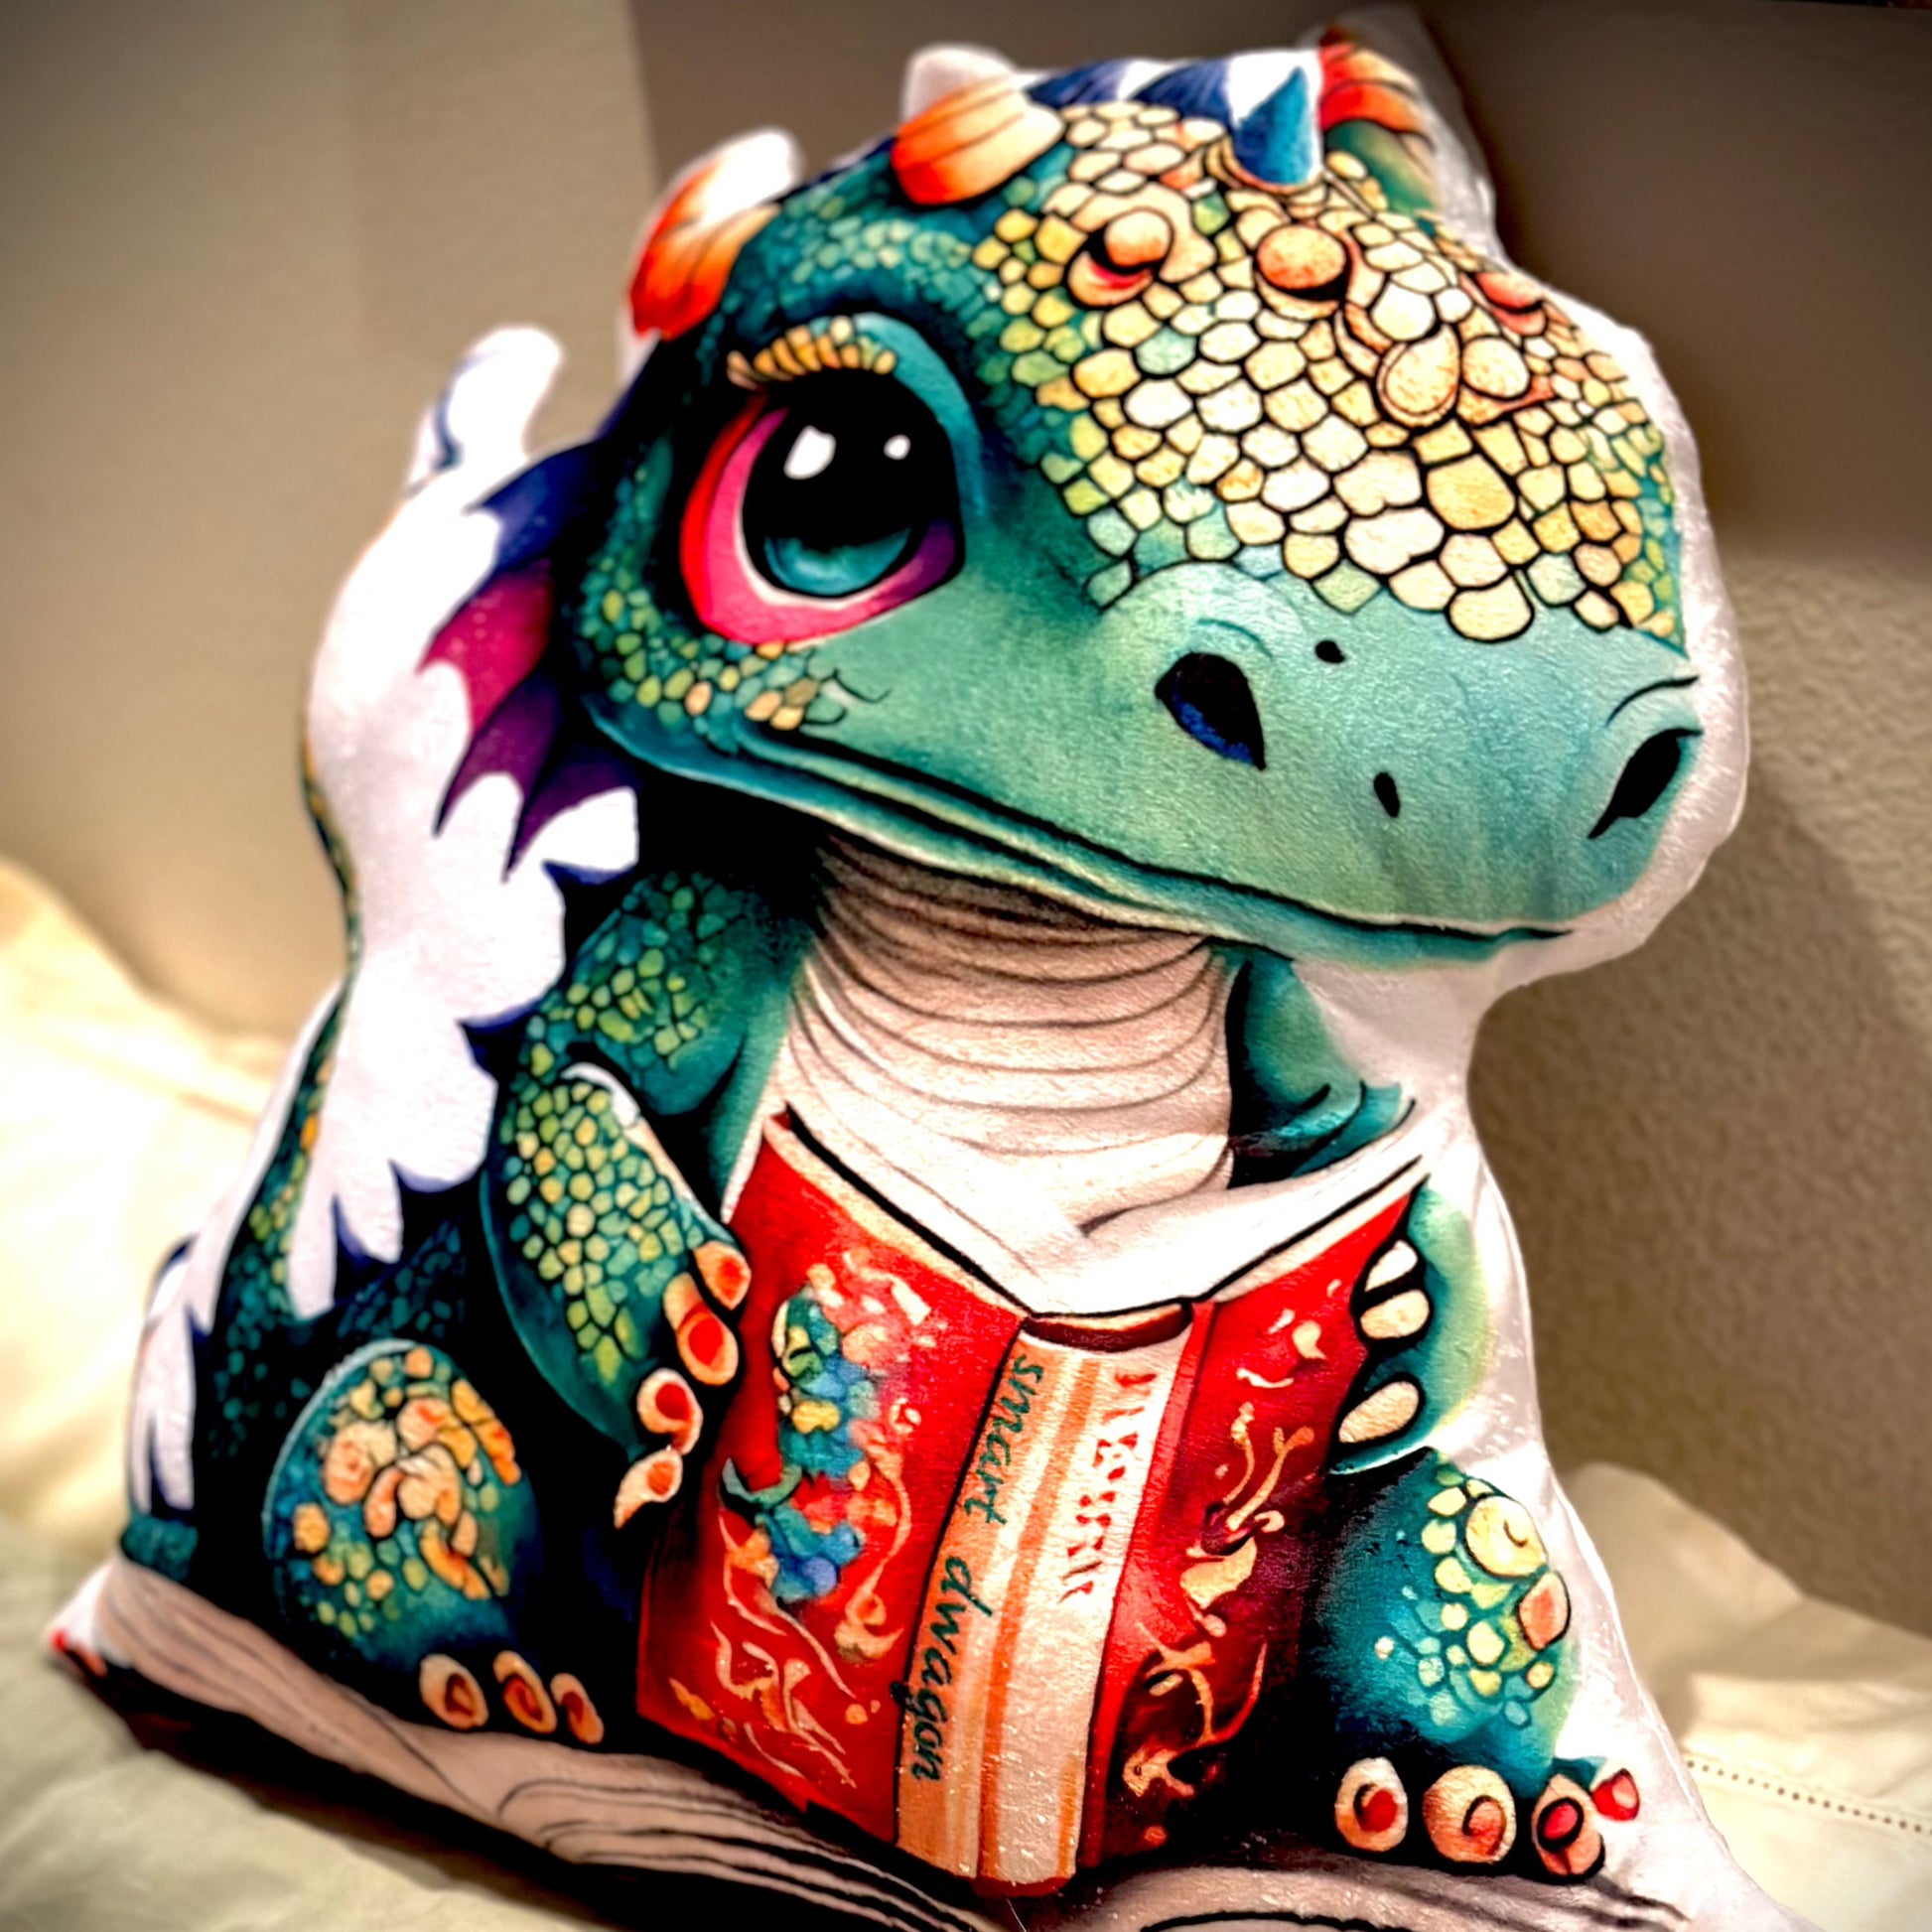 Ricky bookworm baby dragon holds her favorite book - her big green sweet eyes look up at you - in greens yellows and pink & purples Ricky is adorable and promotes the good idea of reading as children - minky plush cuddle-buddy pillow doll is in 4 sizes up to 28 inches tall! Good Fortune & Strength are pure dragon energy!